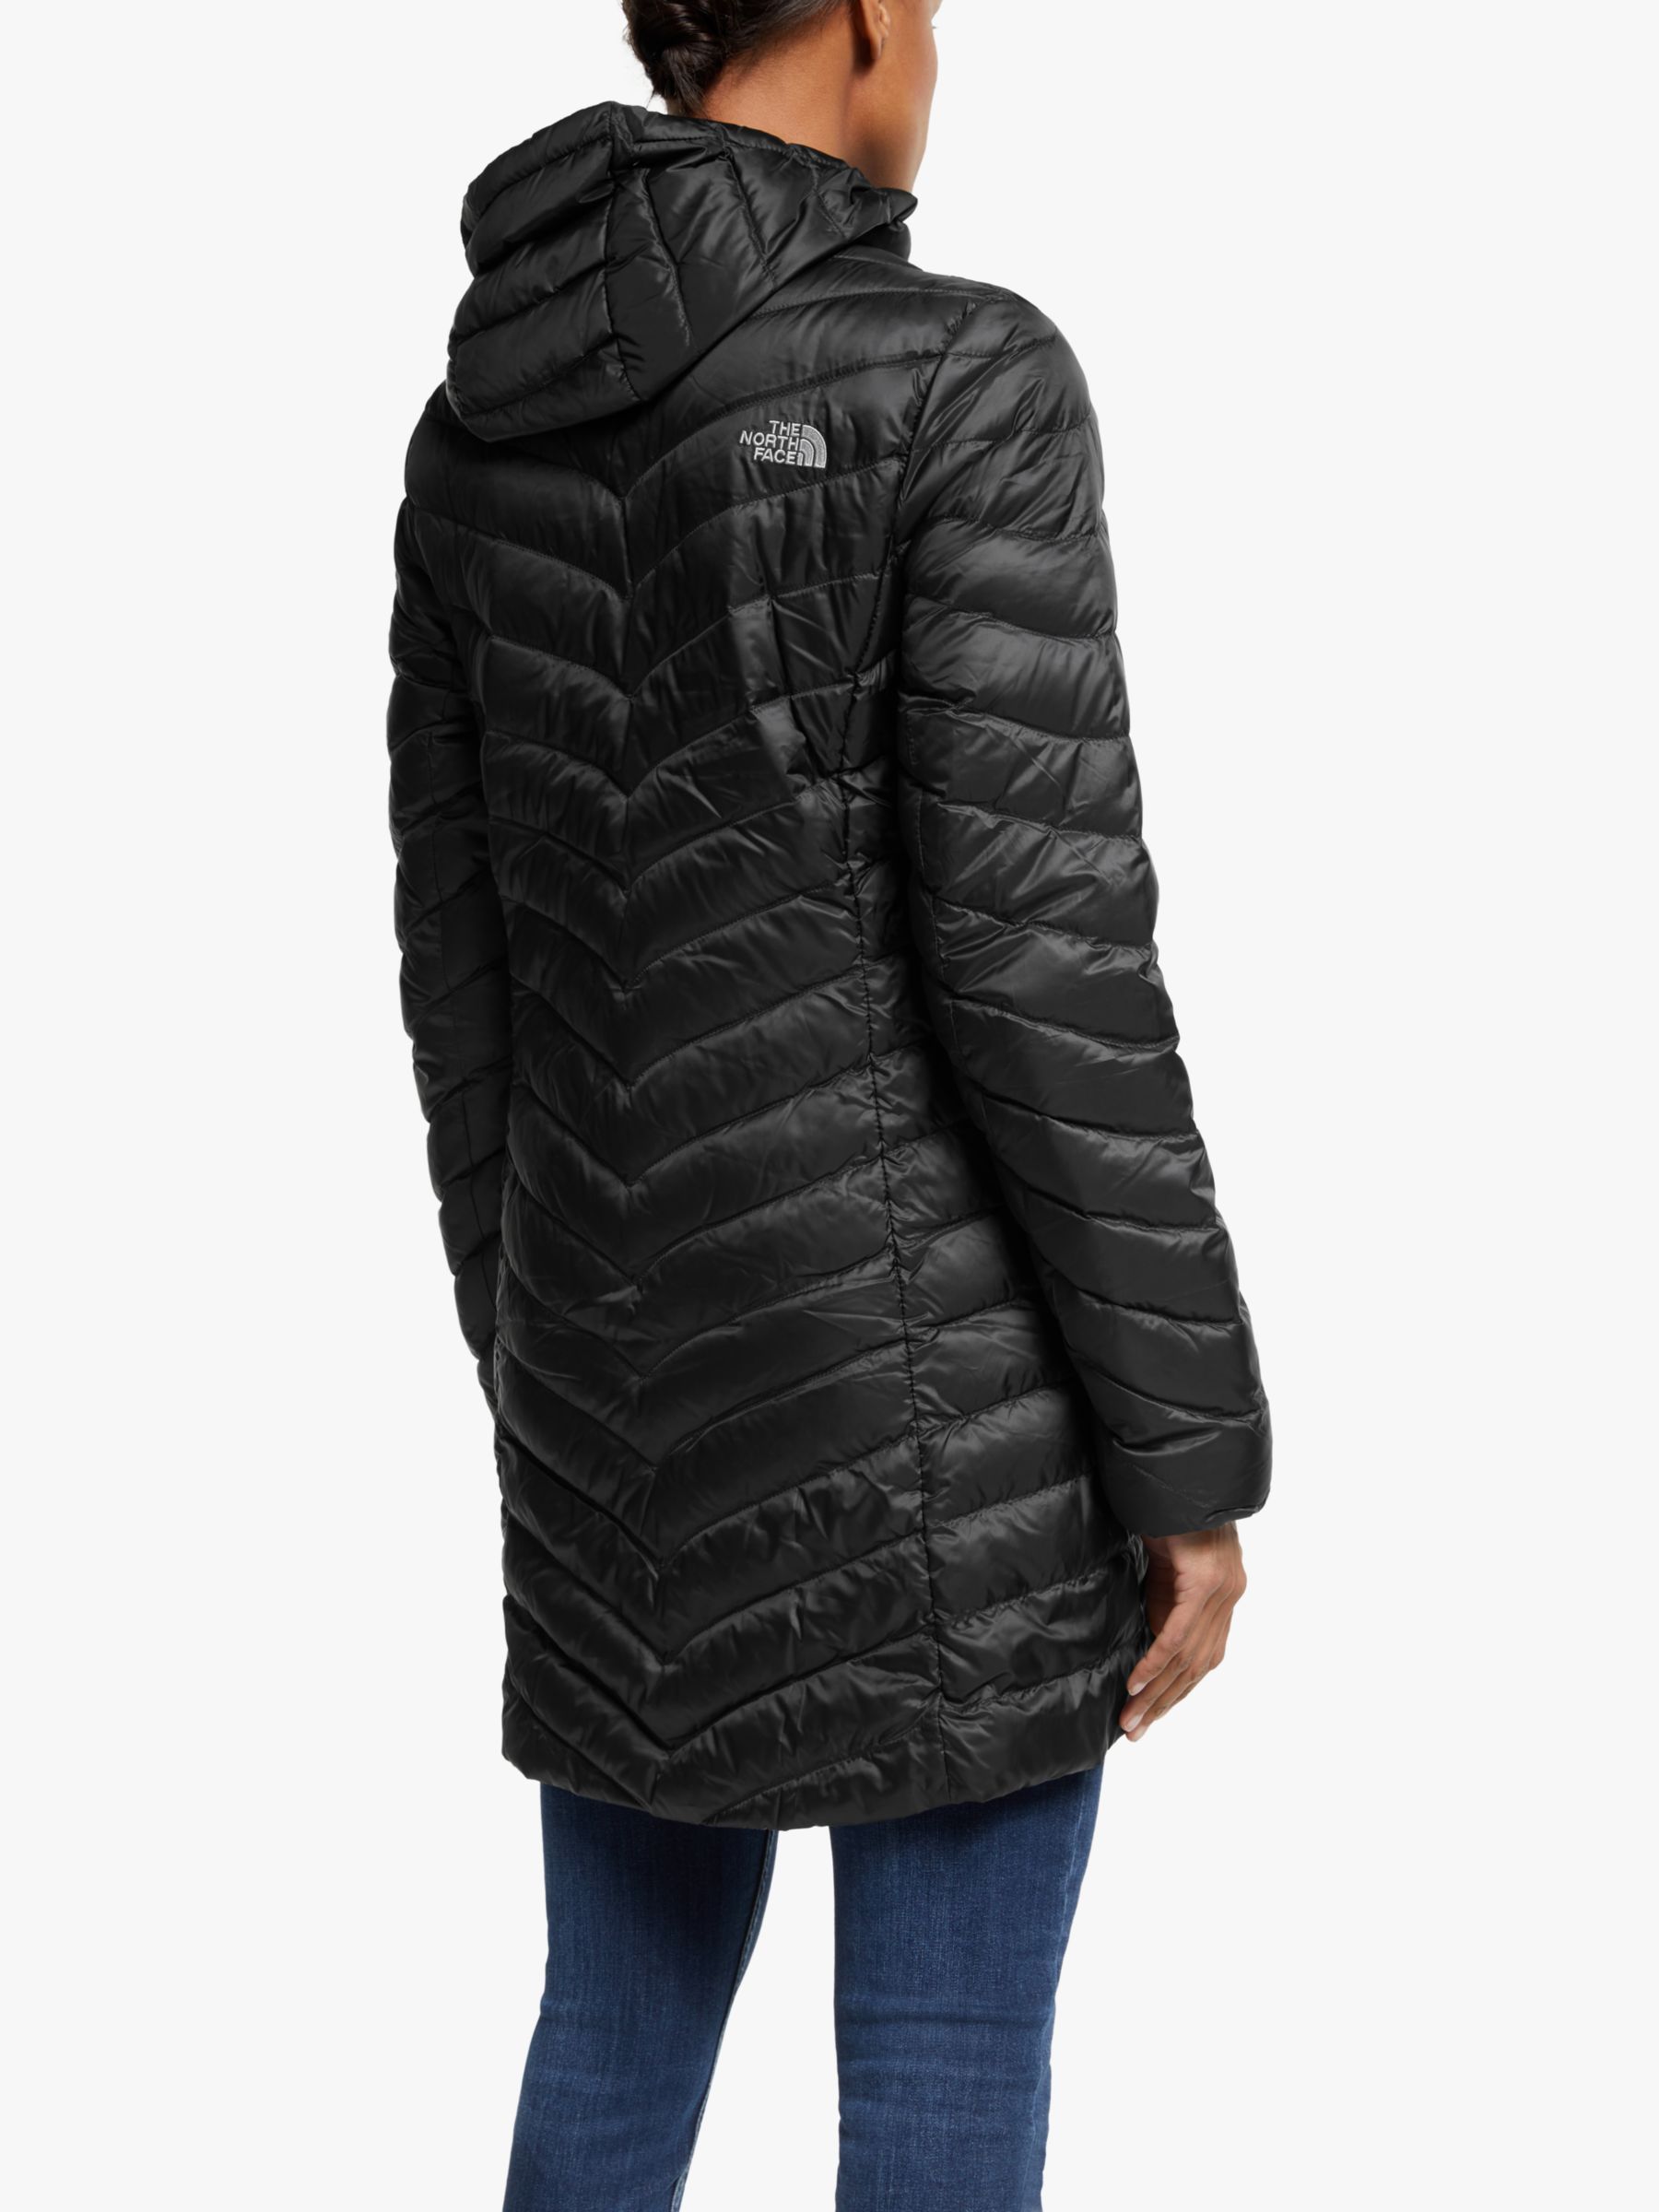 north face trevail parka review